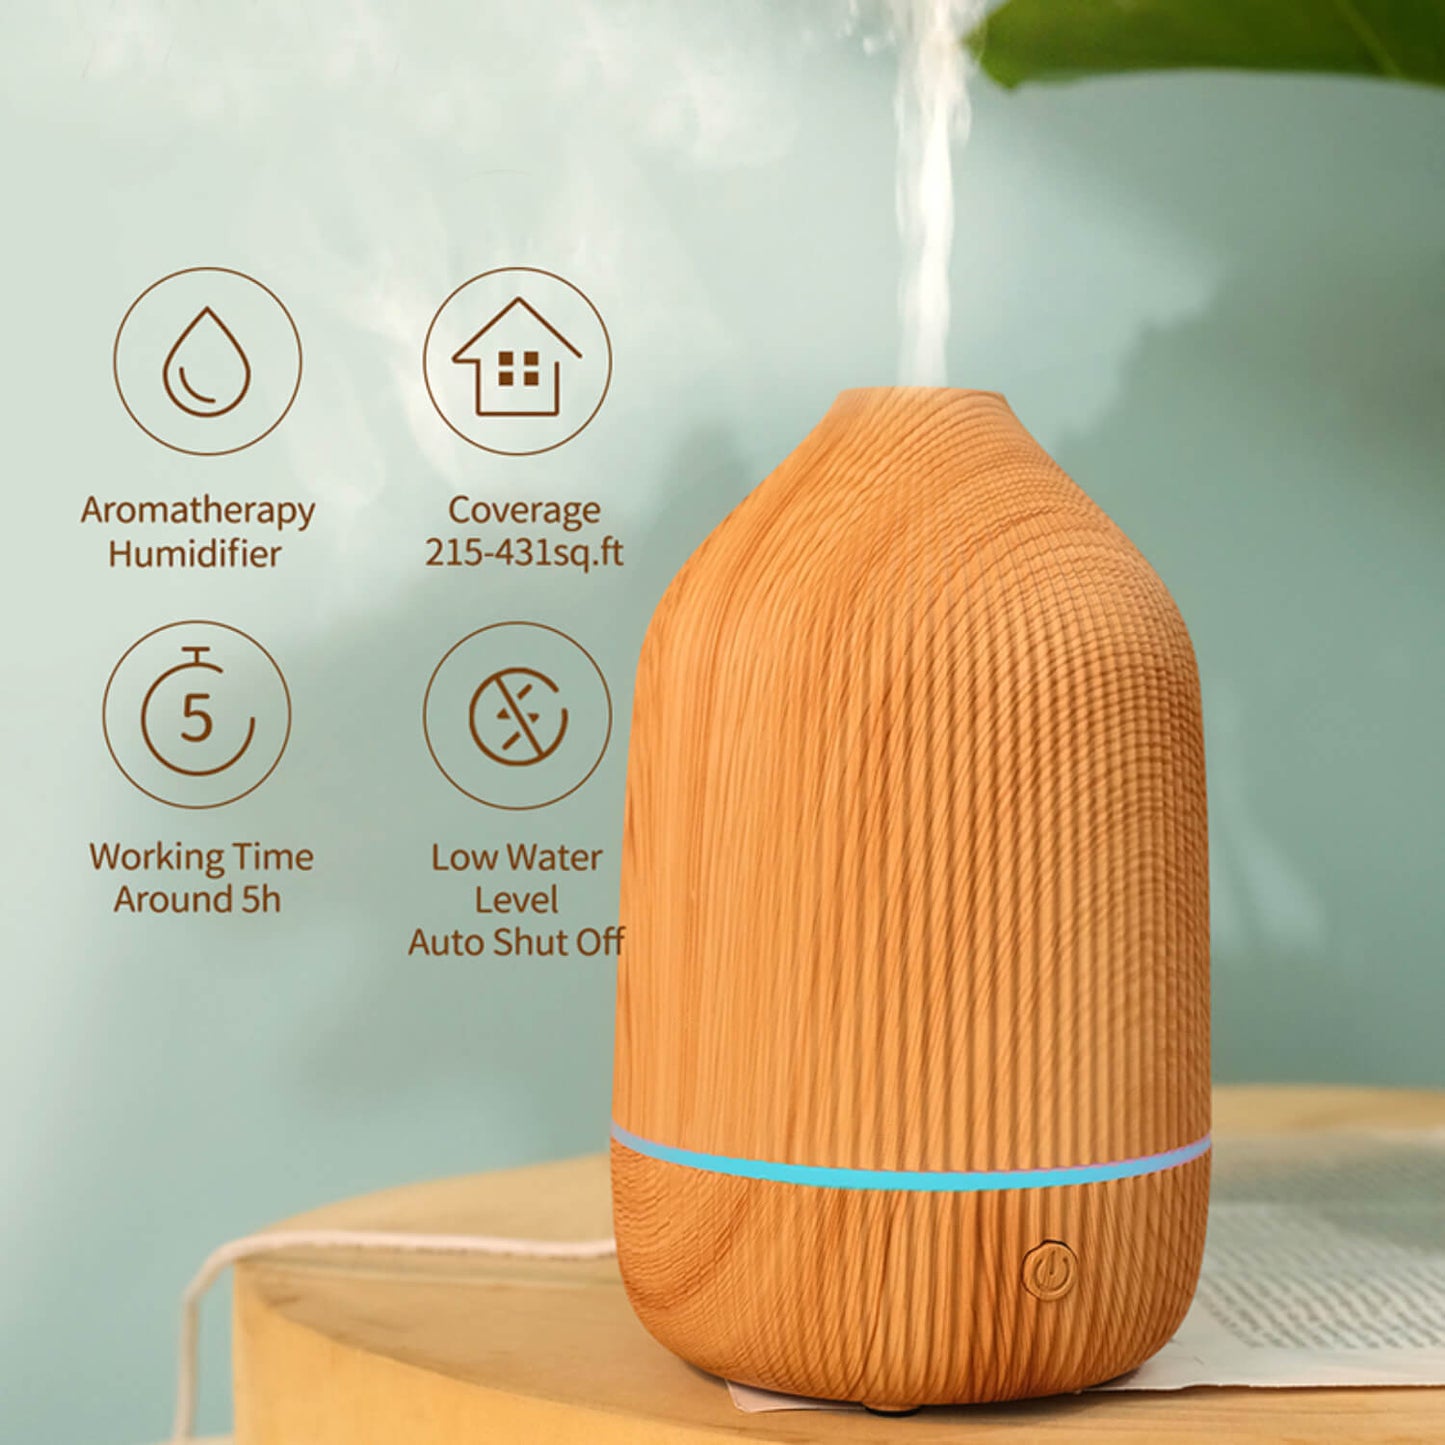 SereneVase Aroma Diffuser - Create a Tranquil and Cozy Ambiance.